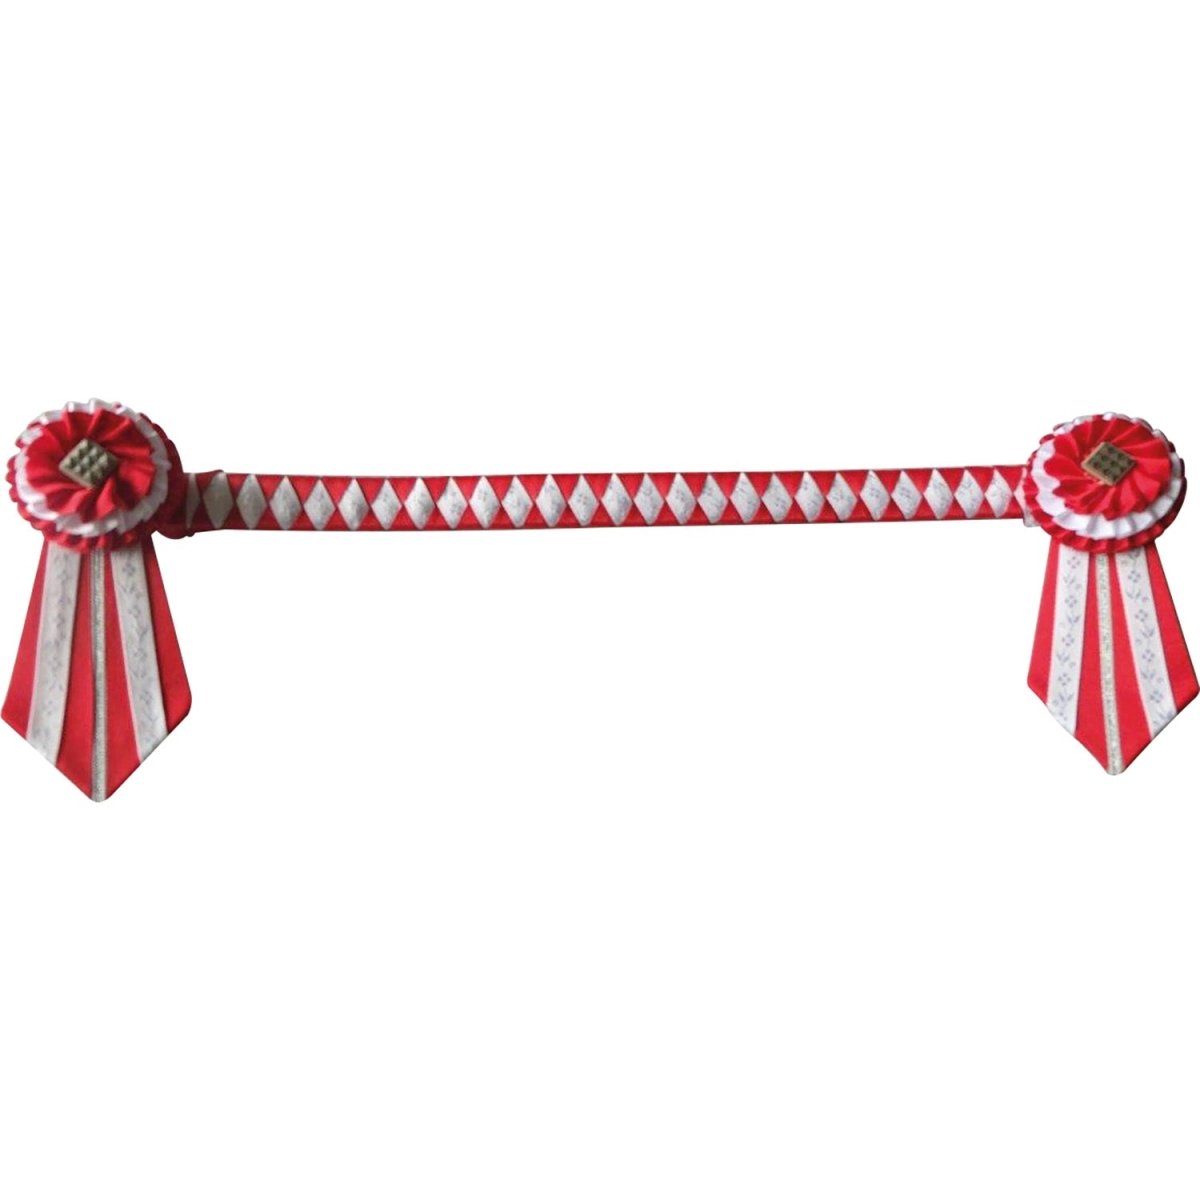 Showquest Browband Camden - Red/White - Full